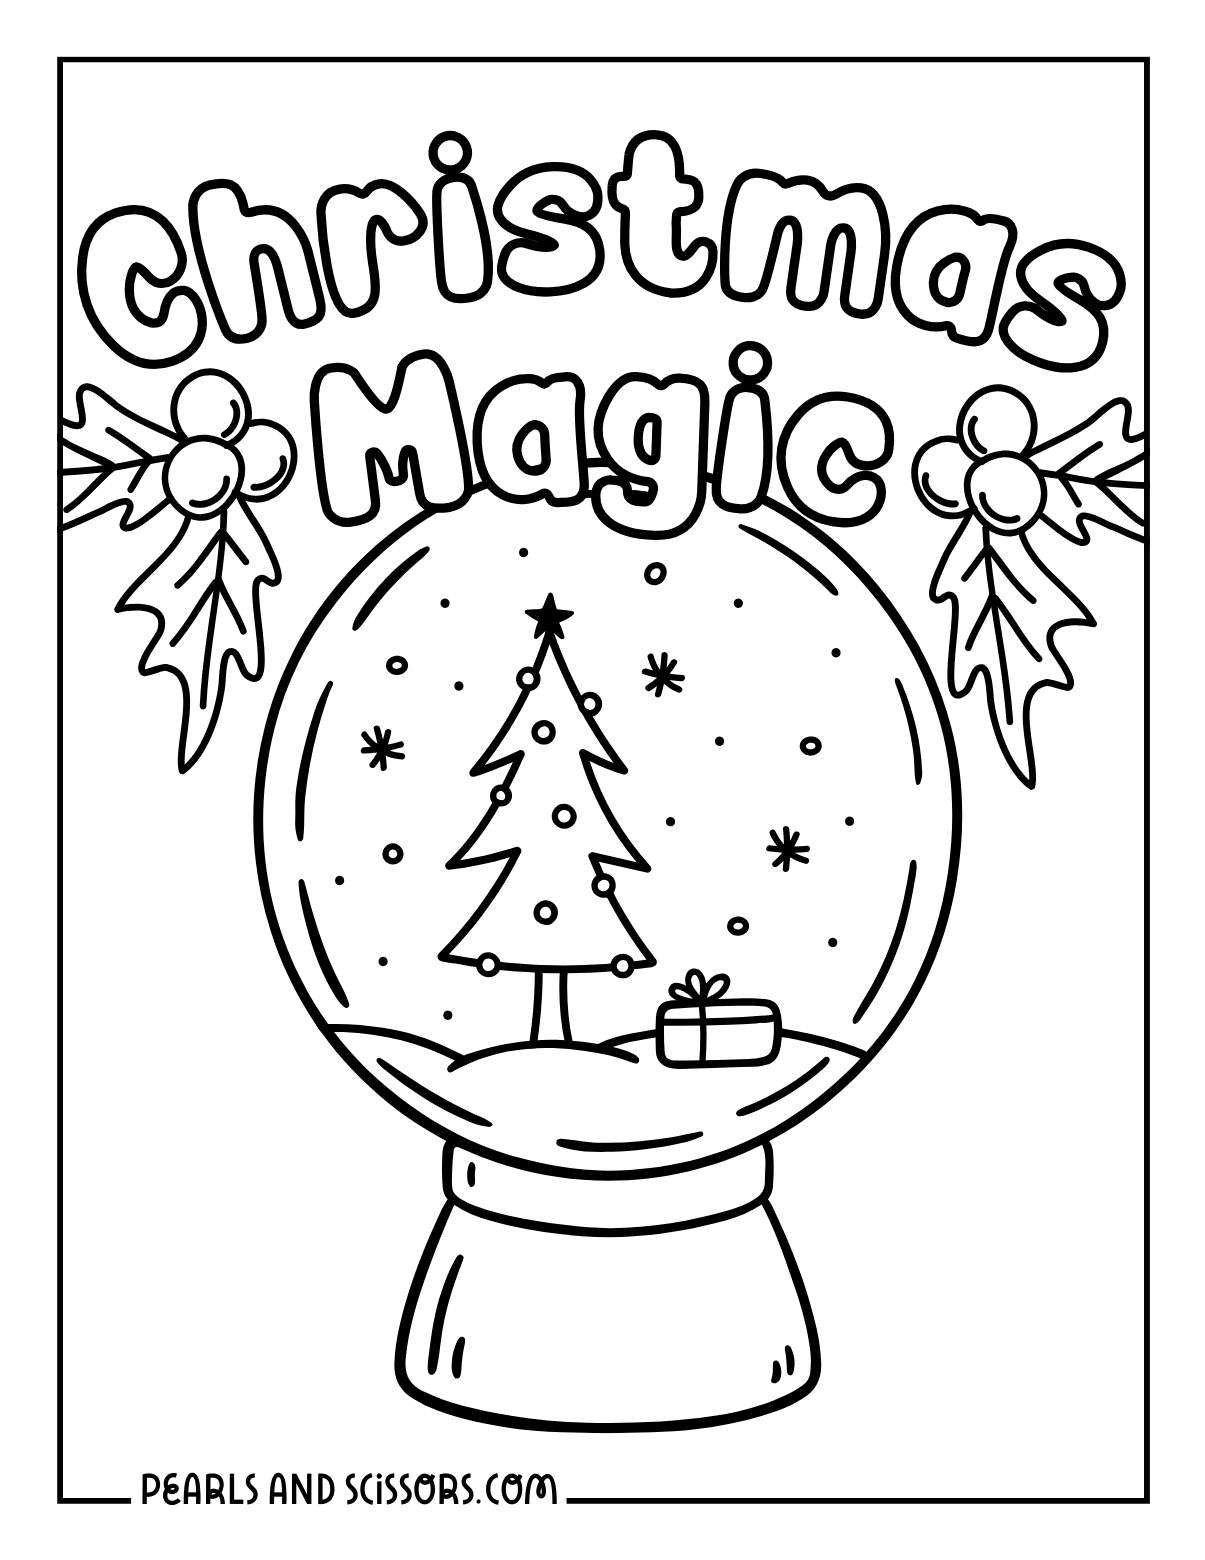 Christmas magic with snow globe coloring page.